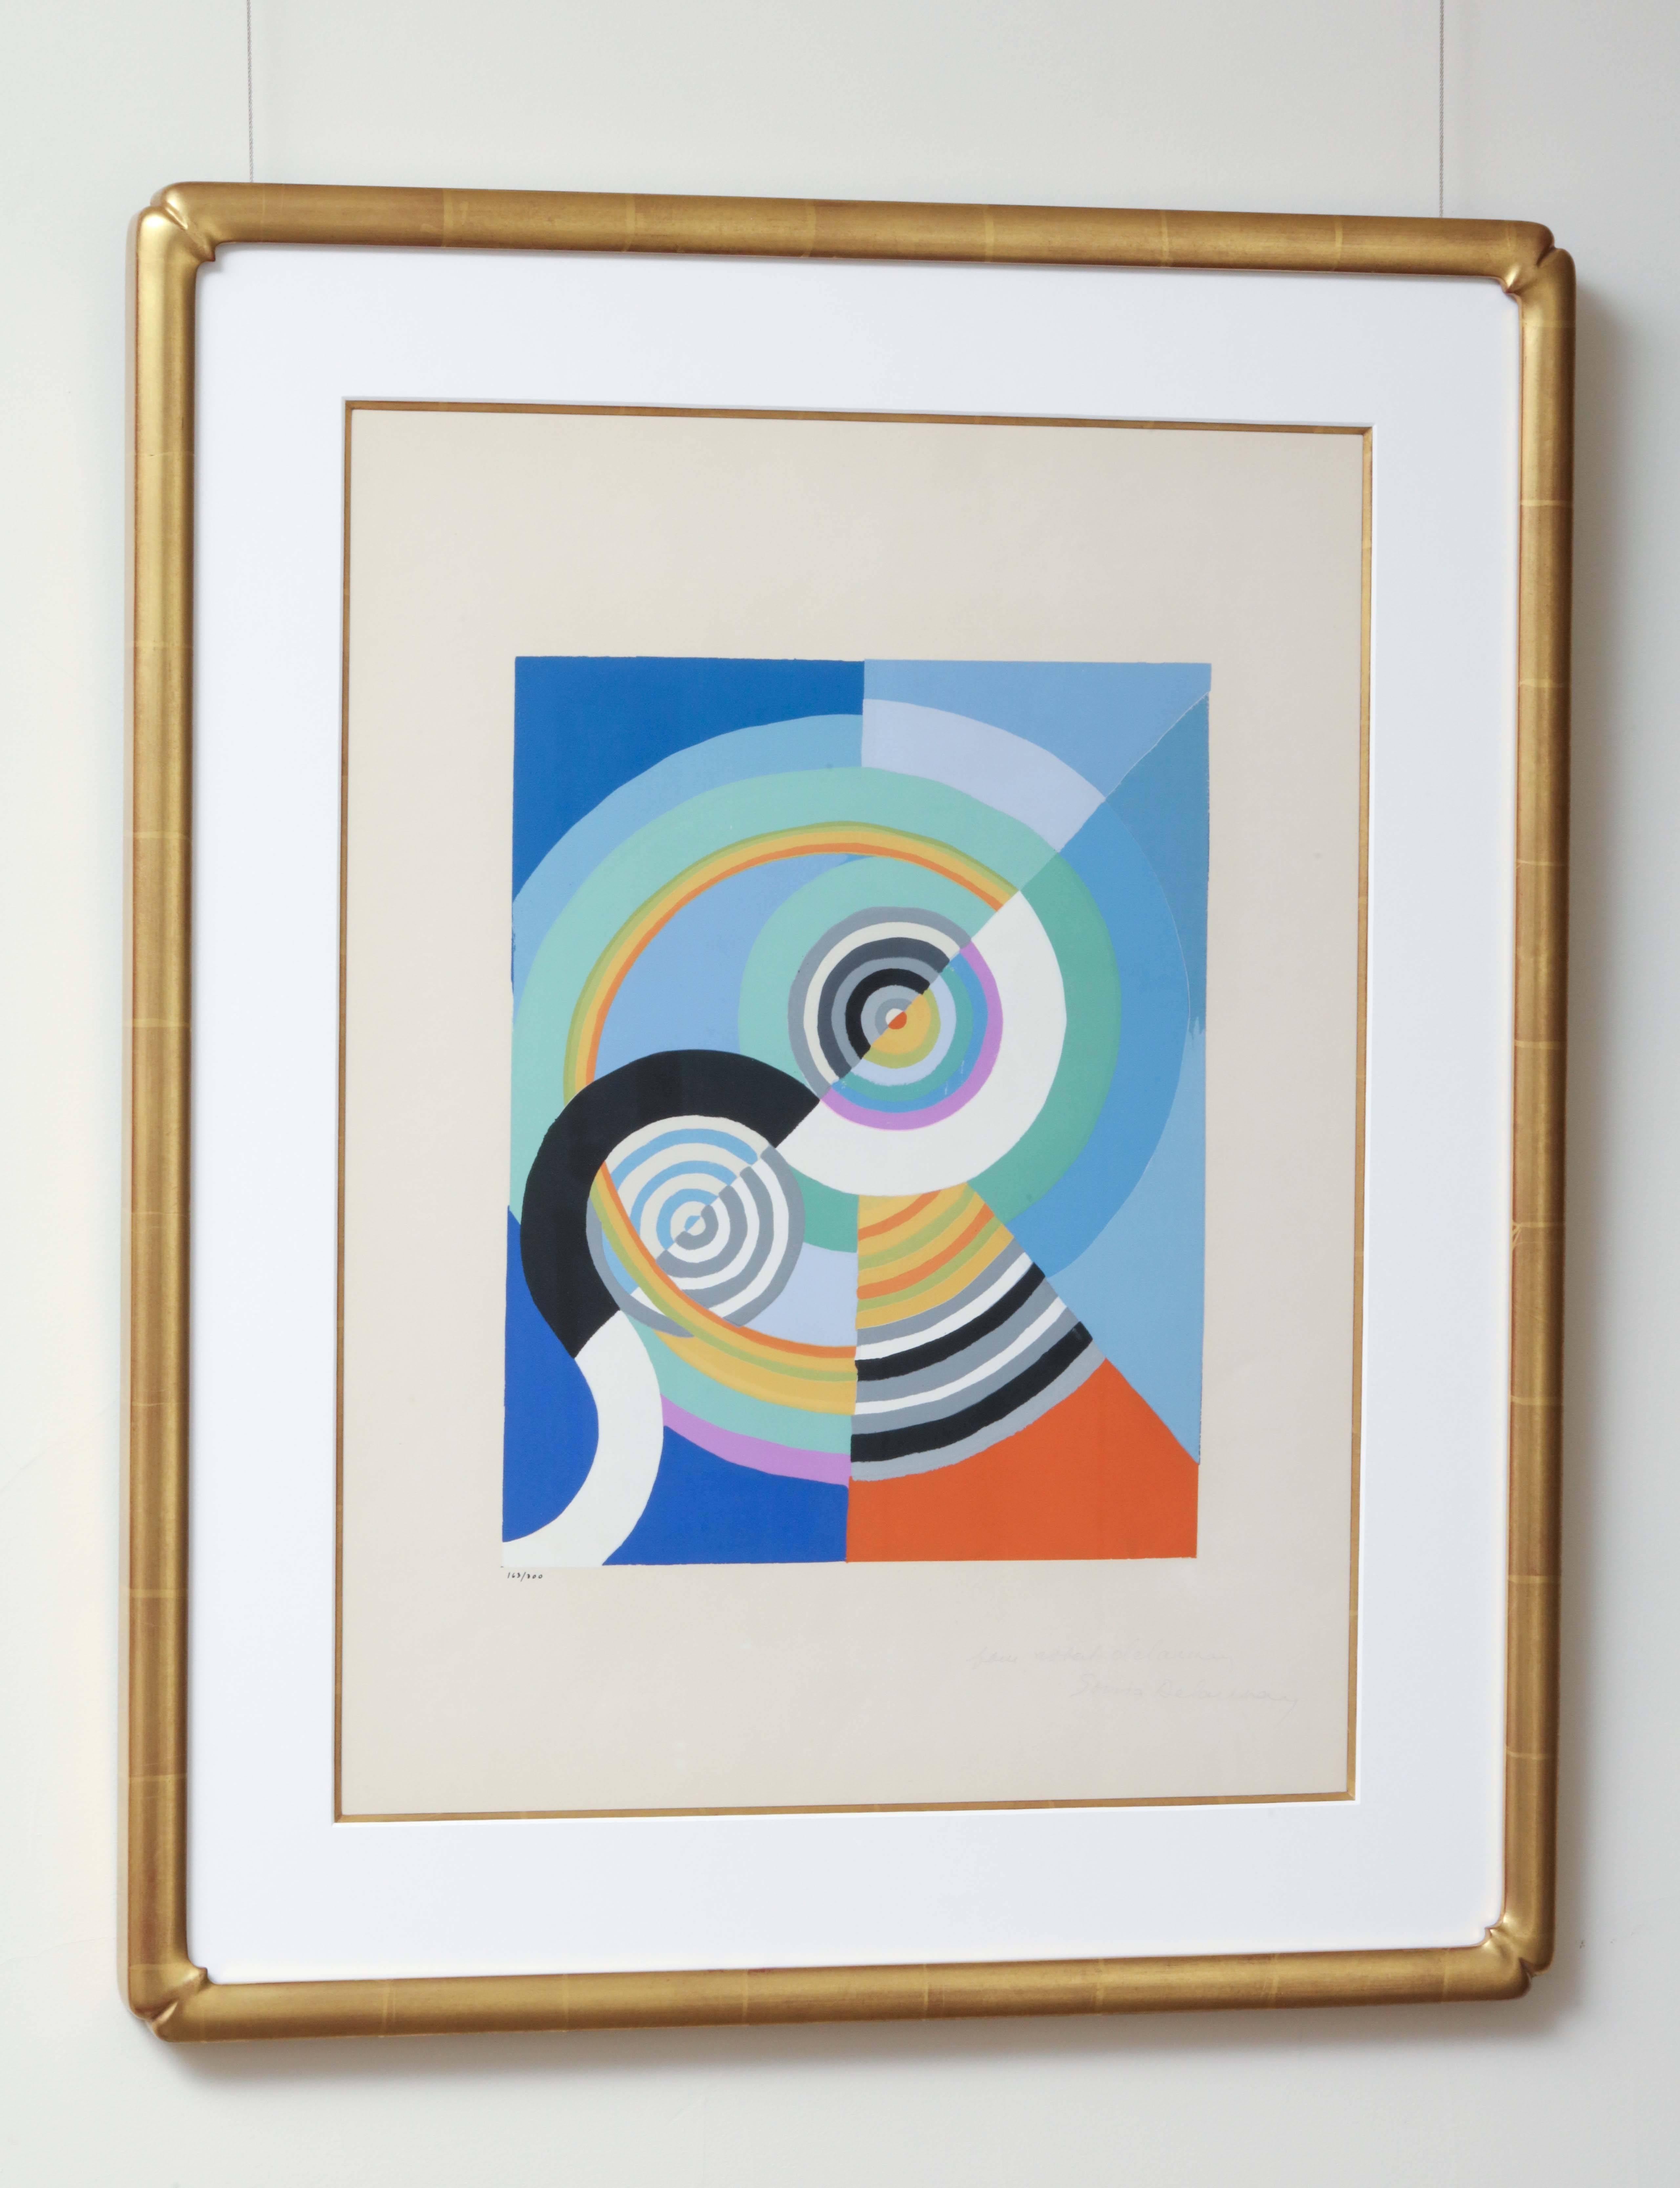 This is a screenprint after the original 1938 gouache by Robert Delaunay, printed in 1953 under the supervision of the estate. Signed by his wife Sonia Delaunay in pencil “pour Robert Delaunay Sonia Delaunay” and numbered 163/300.

Measures: Sheet: